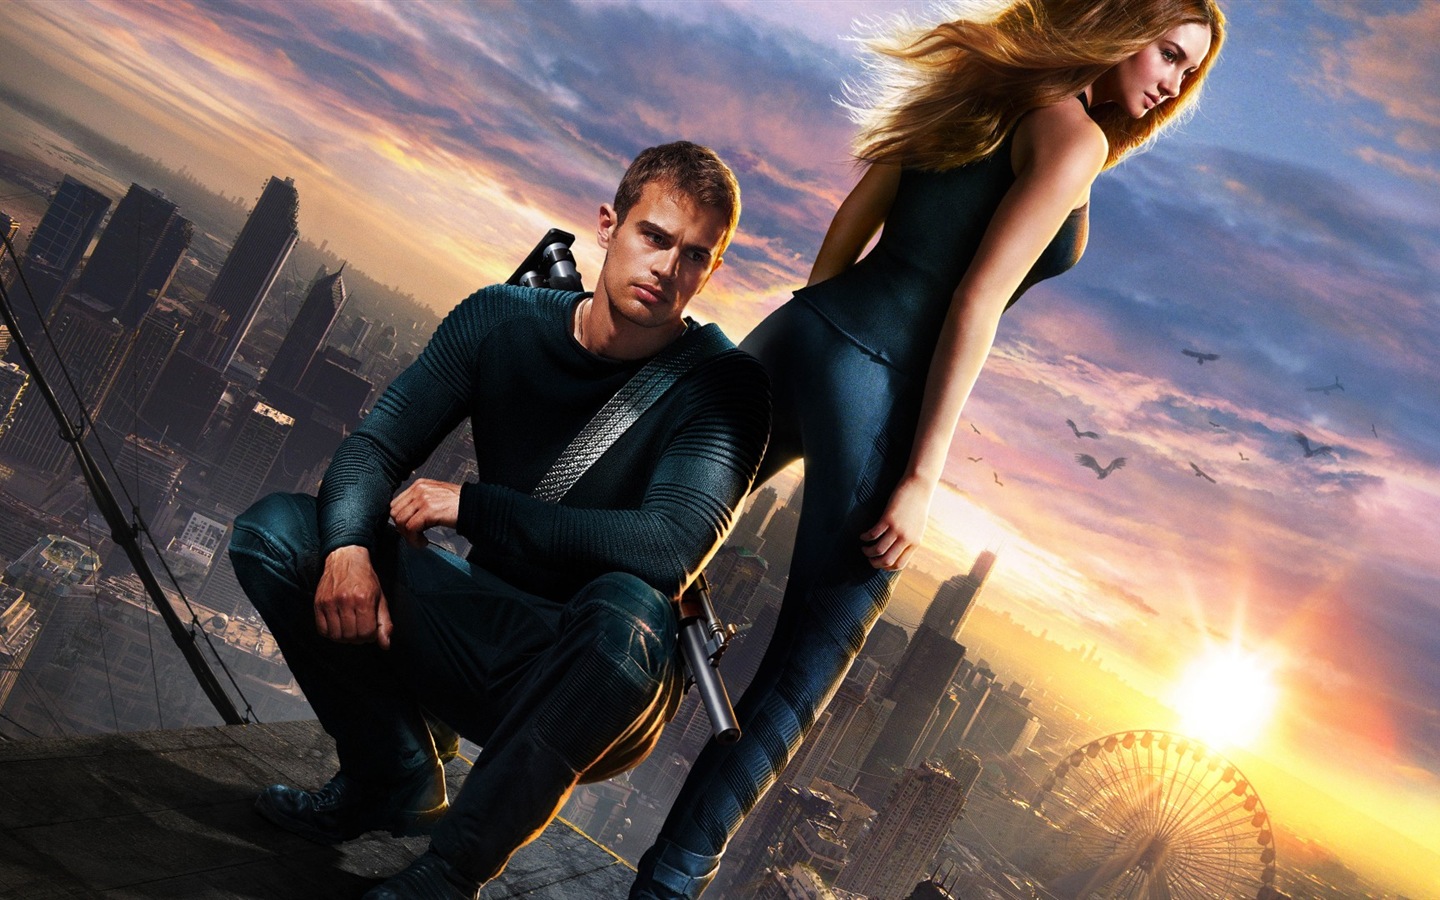 Divergent movie HD wallpapers #10 - 1440x900